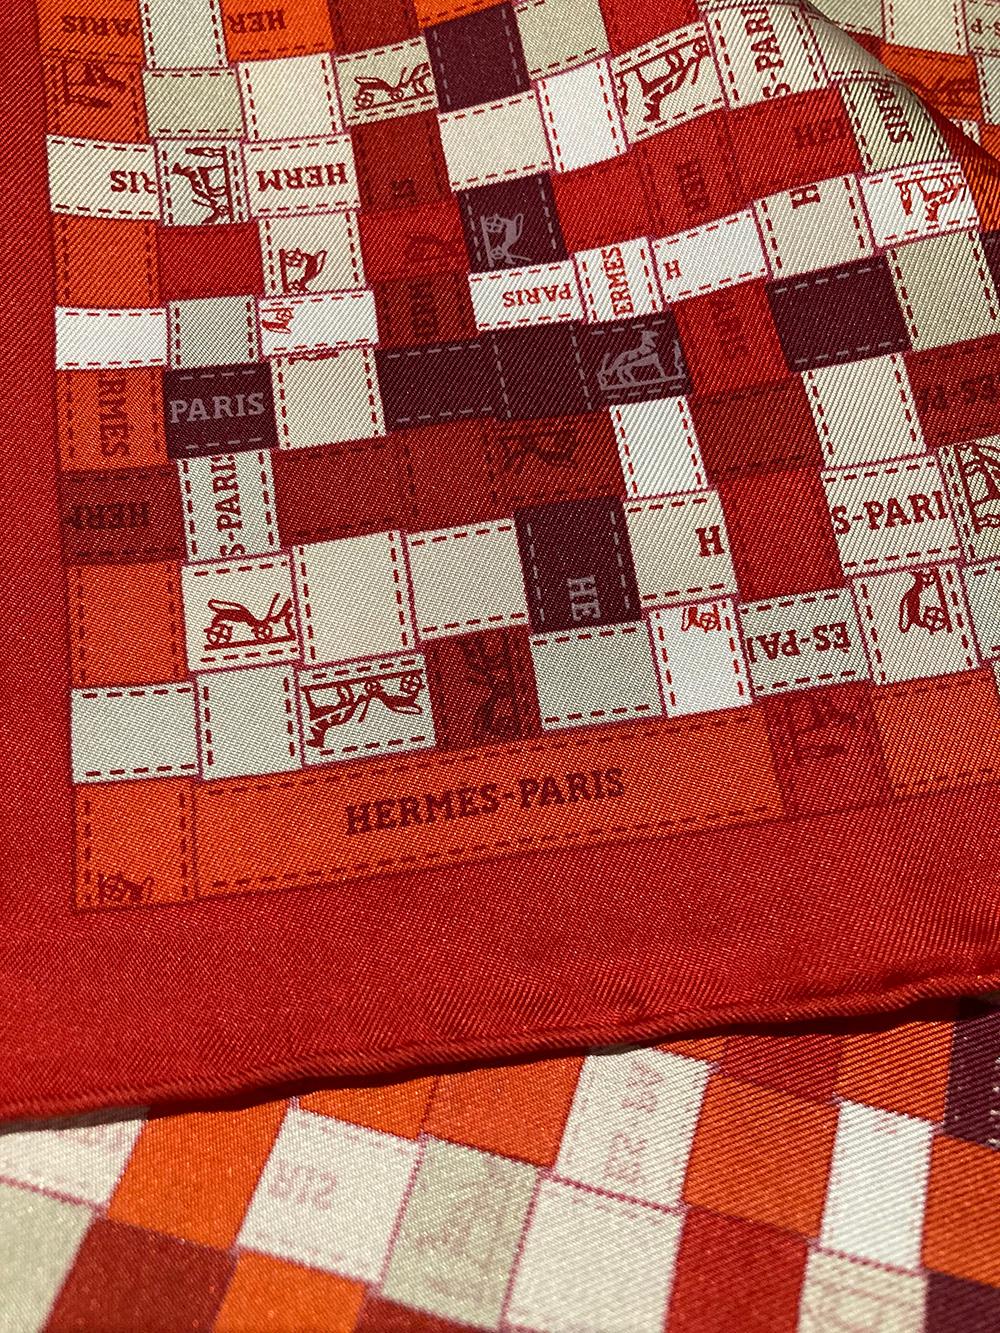 Hermes Red Bolduc Au Carre Silk Scarf in new condition. Original silk screen design c.2007 by Cathy Latham. features various shades of reds, whites, and grey with Hermes logo on right side. No stains smells or fabric pulls. Made in France. Hand